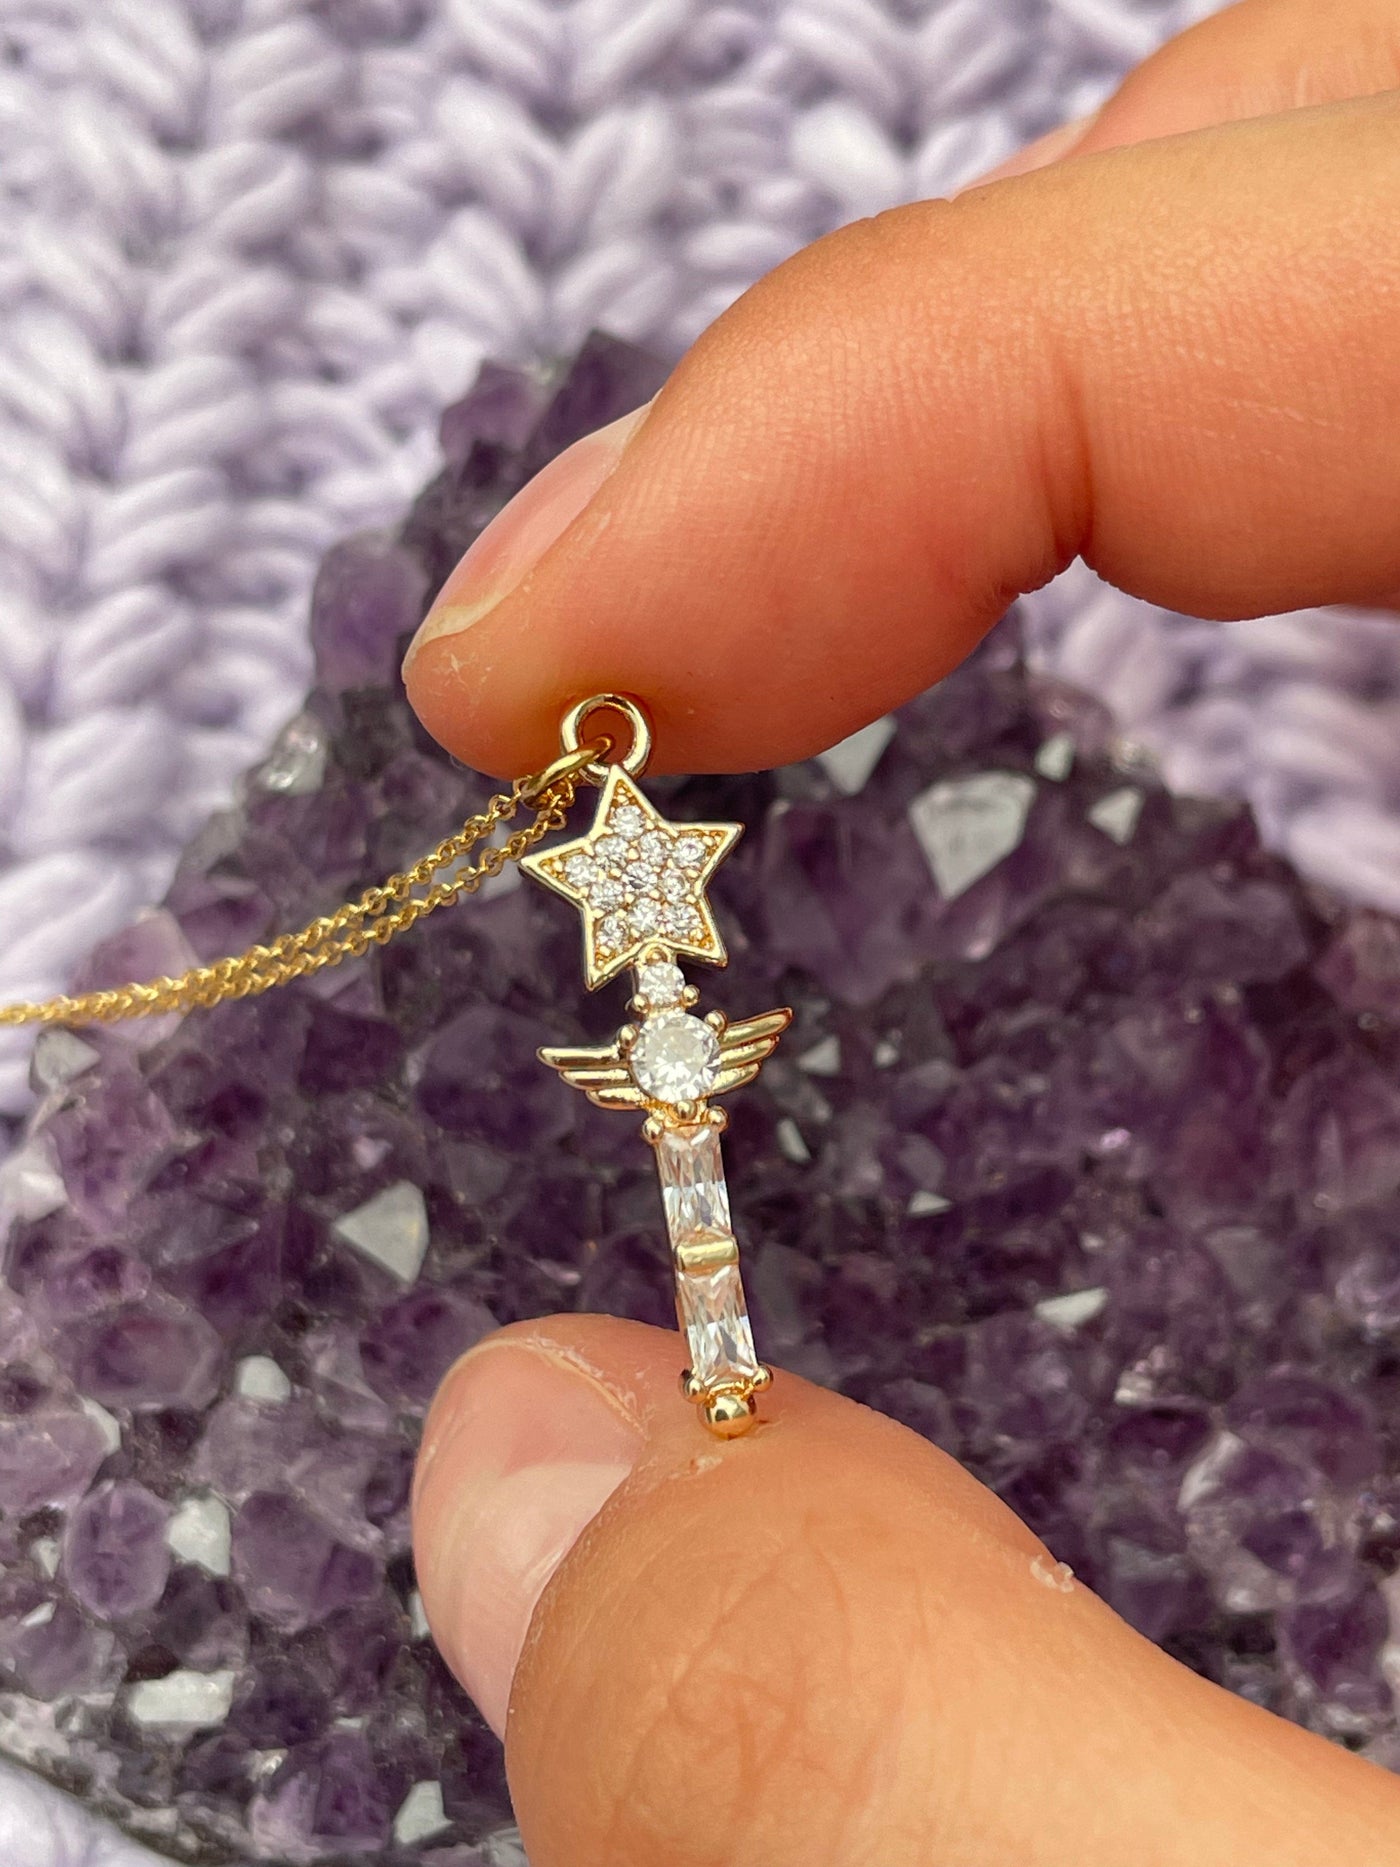 Star Scepter Necklace